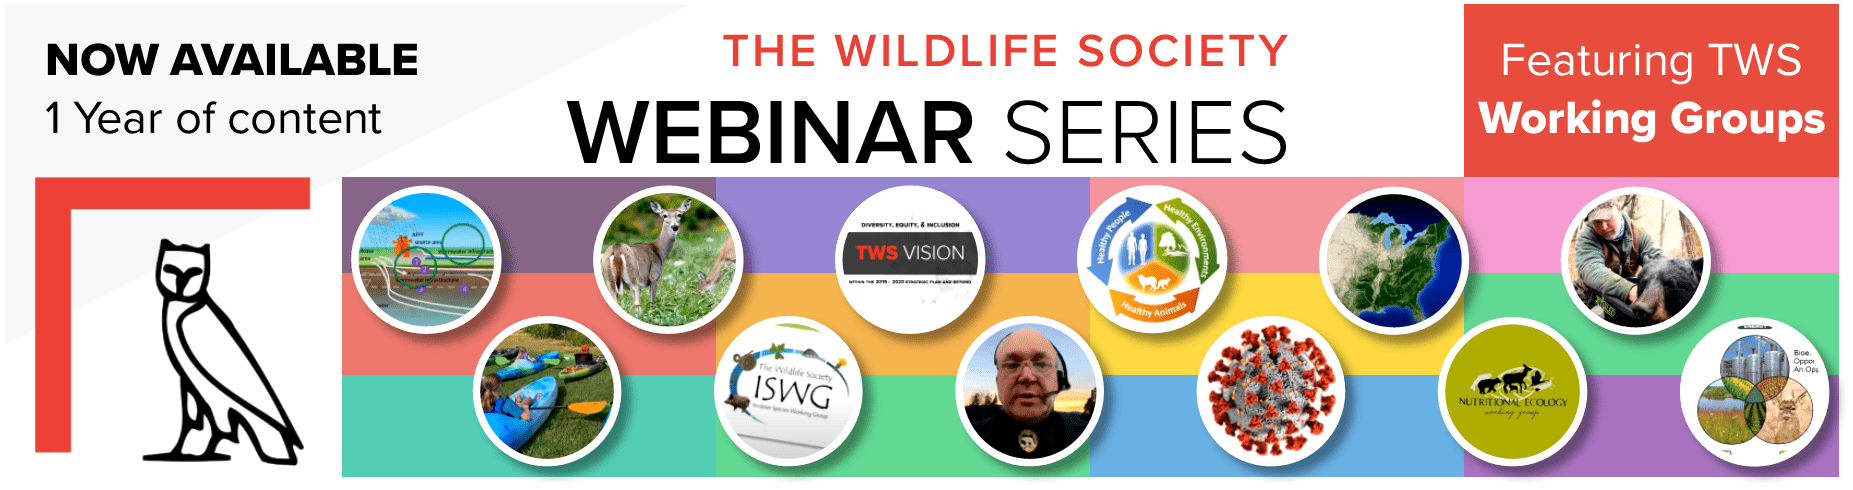 1 year of TWS Webinar content now available through our YouTube channel